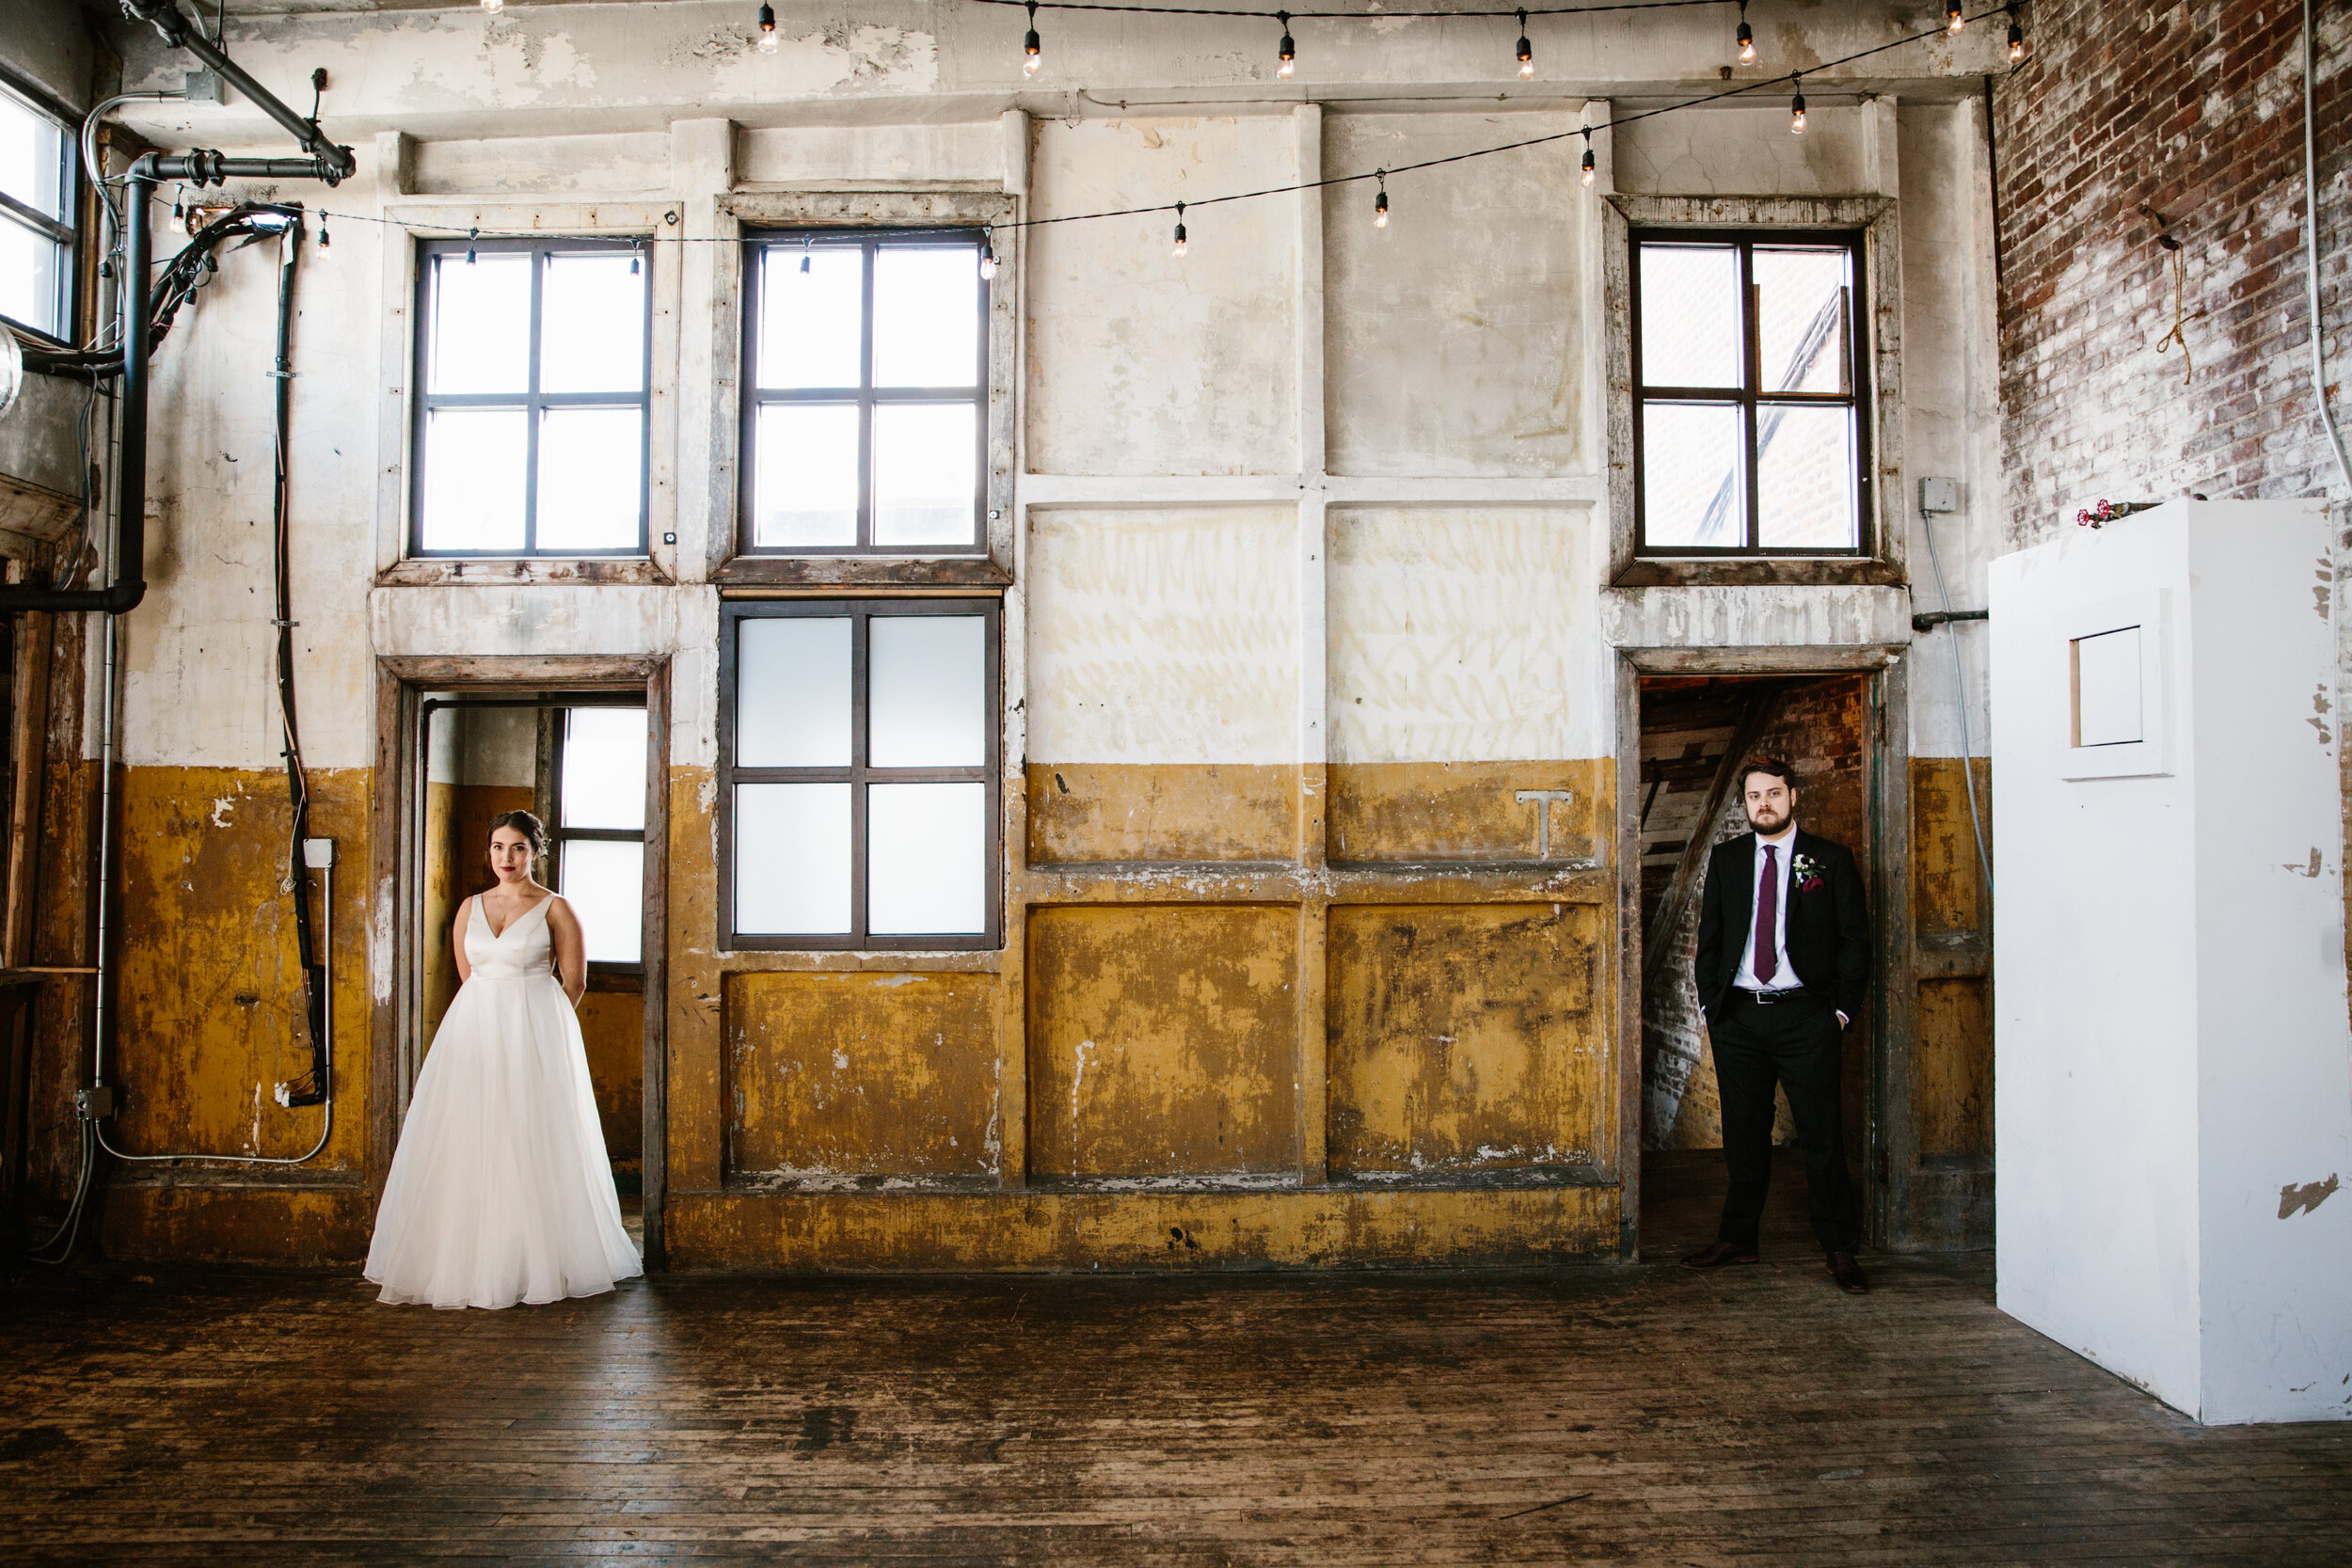 Two marriers stand in a large industrial room in separate doorways.